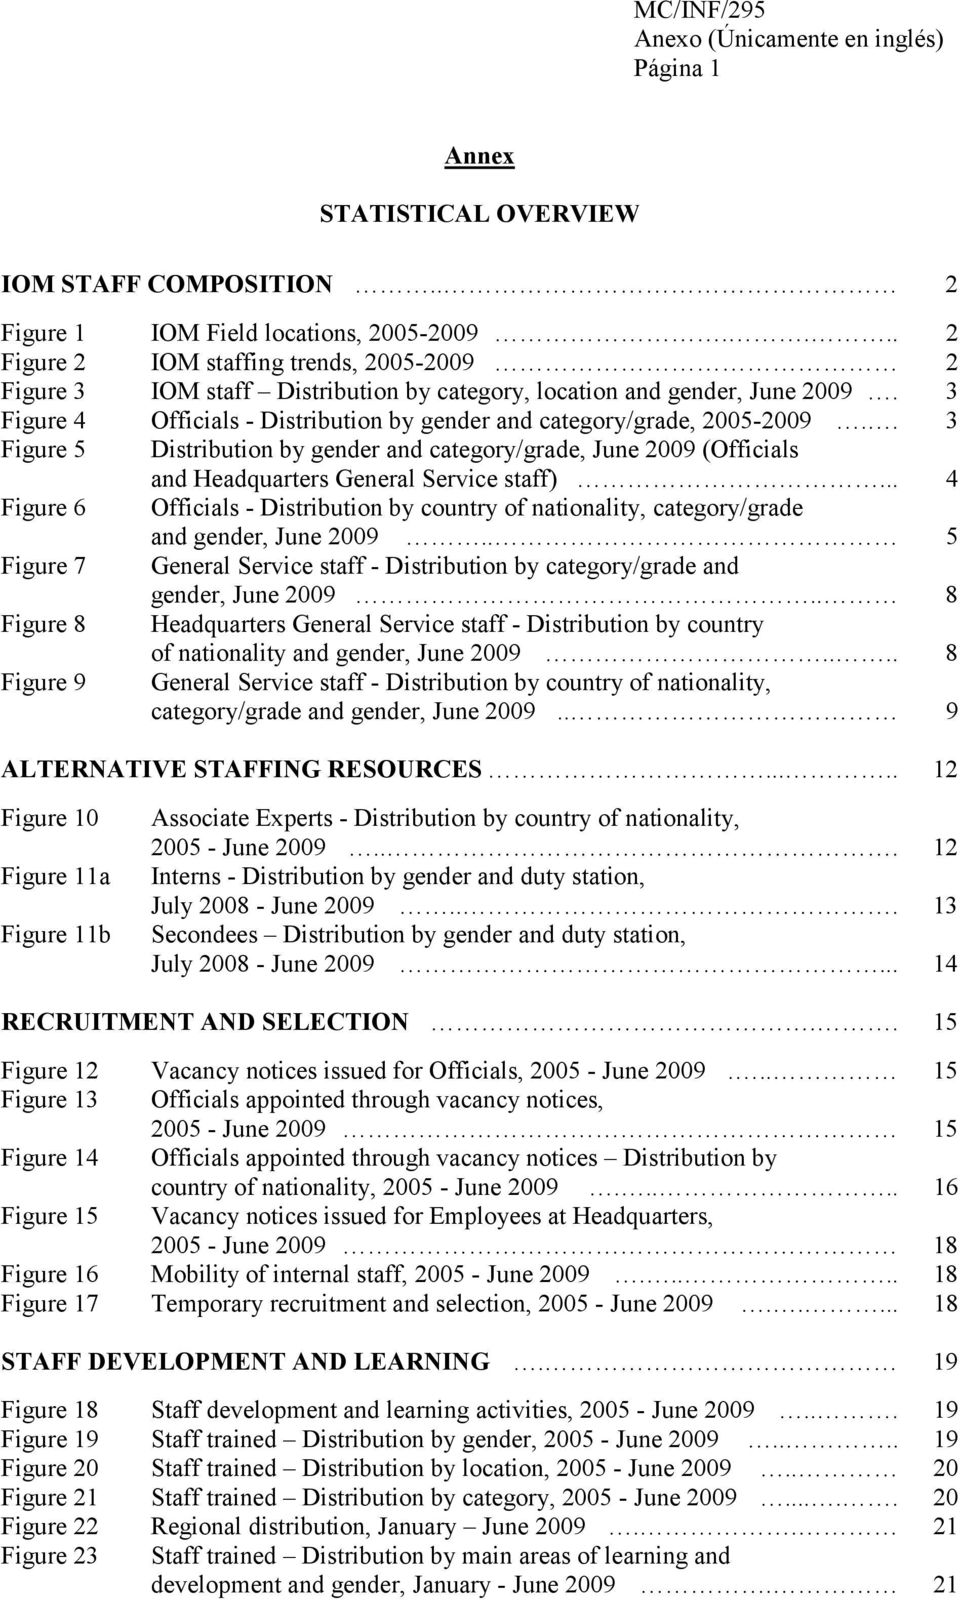 3 Figure 4 Officials - Distribution by gender and category/grade, 2005-2009.. 3 Figure 5 Distribution by gender and category/grade, June 2009 (Officials and Headquarters General Service staff).